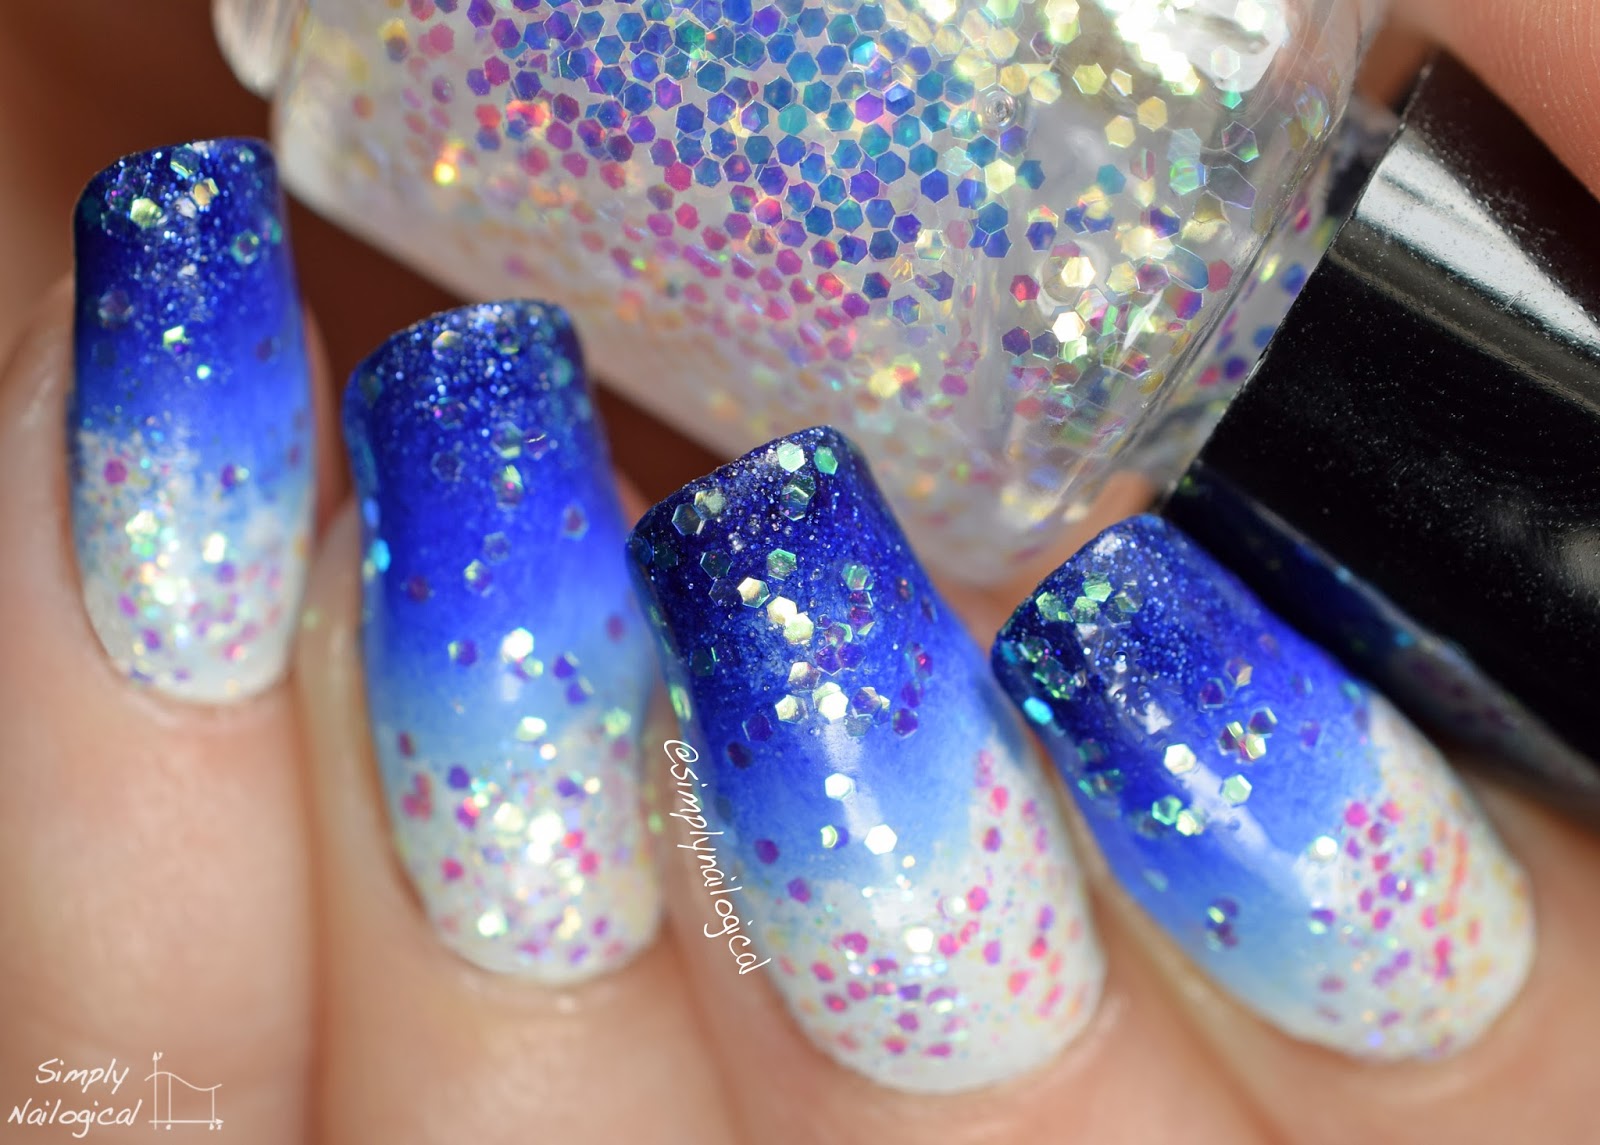 Simply Nailogical: Winter snow glitters over blue to white gradient